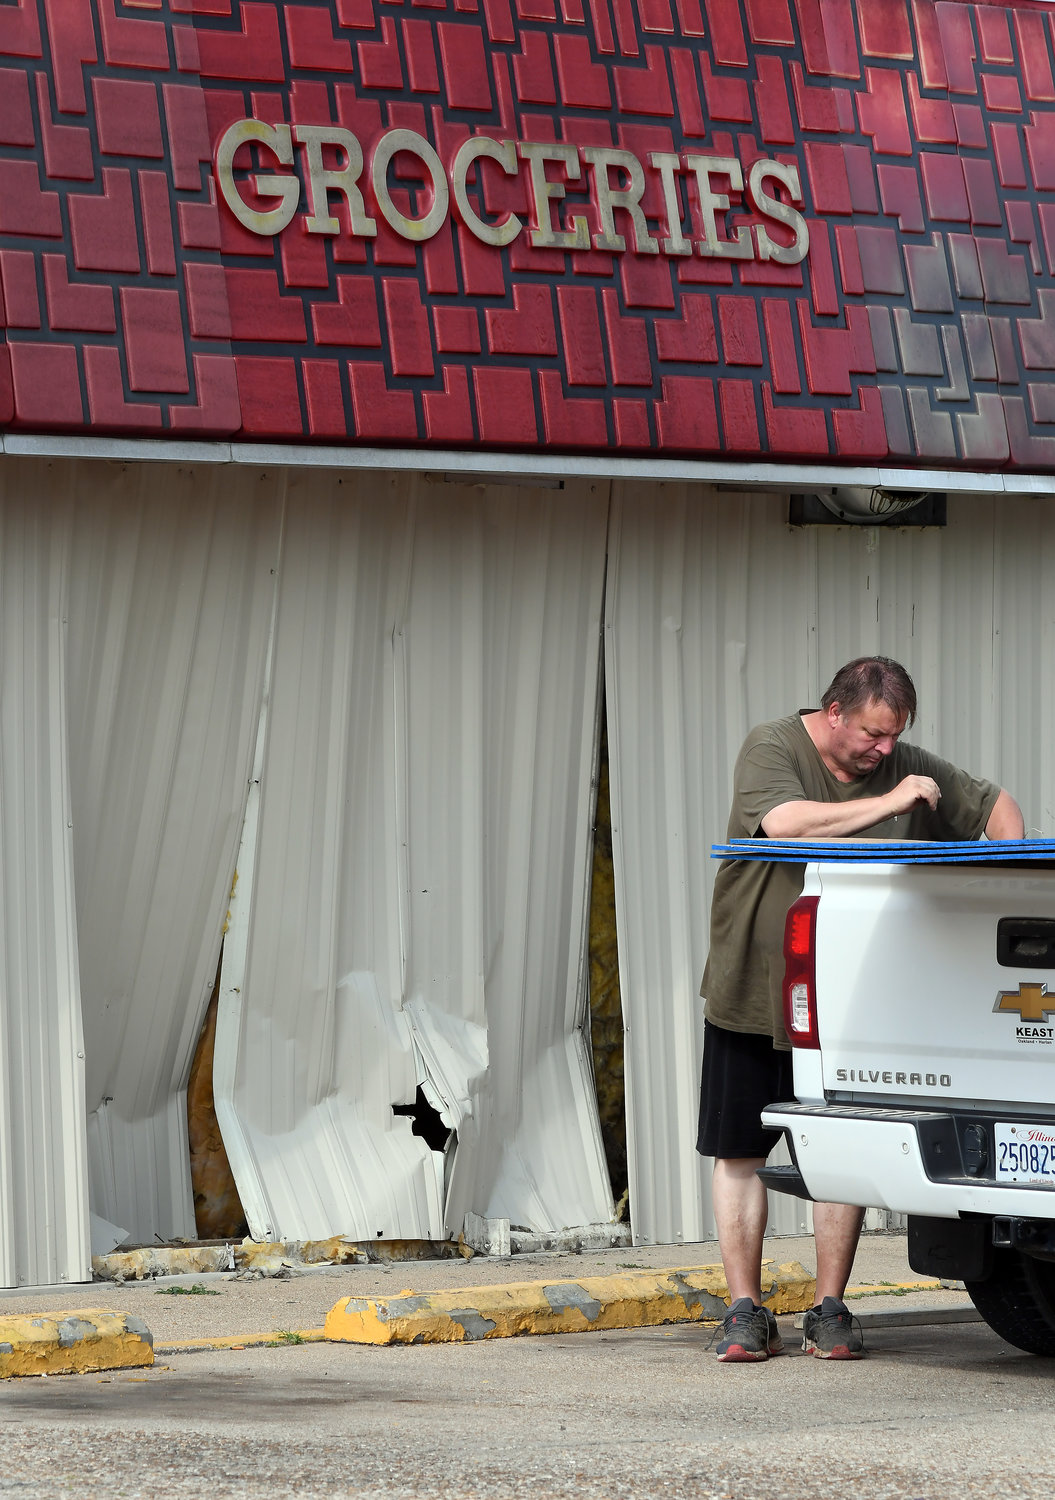 Russell Nelson with Bailey Construction of Sedalia, Mo., prepares to cover damage Monday afternoon to the Owensville Casey’s General Store building. A customer’s vehicle hopped the curb earlier in the day.